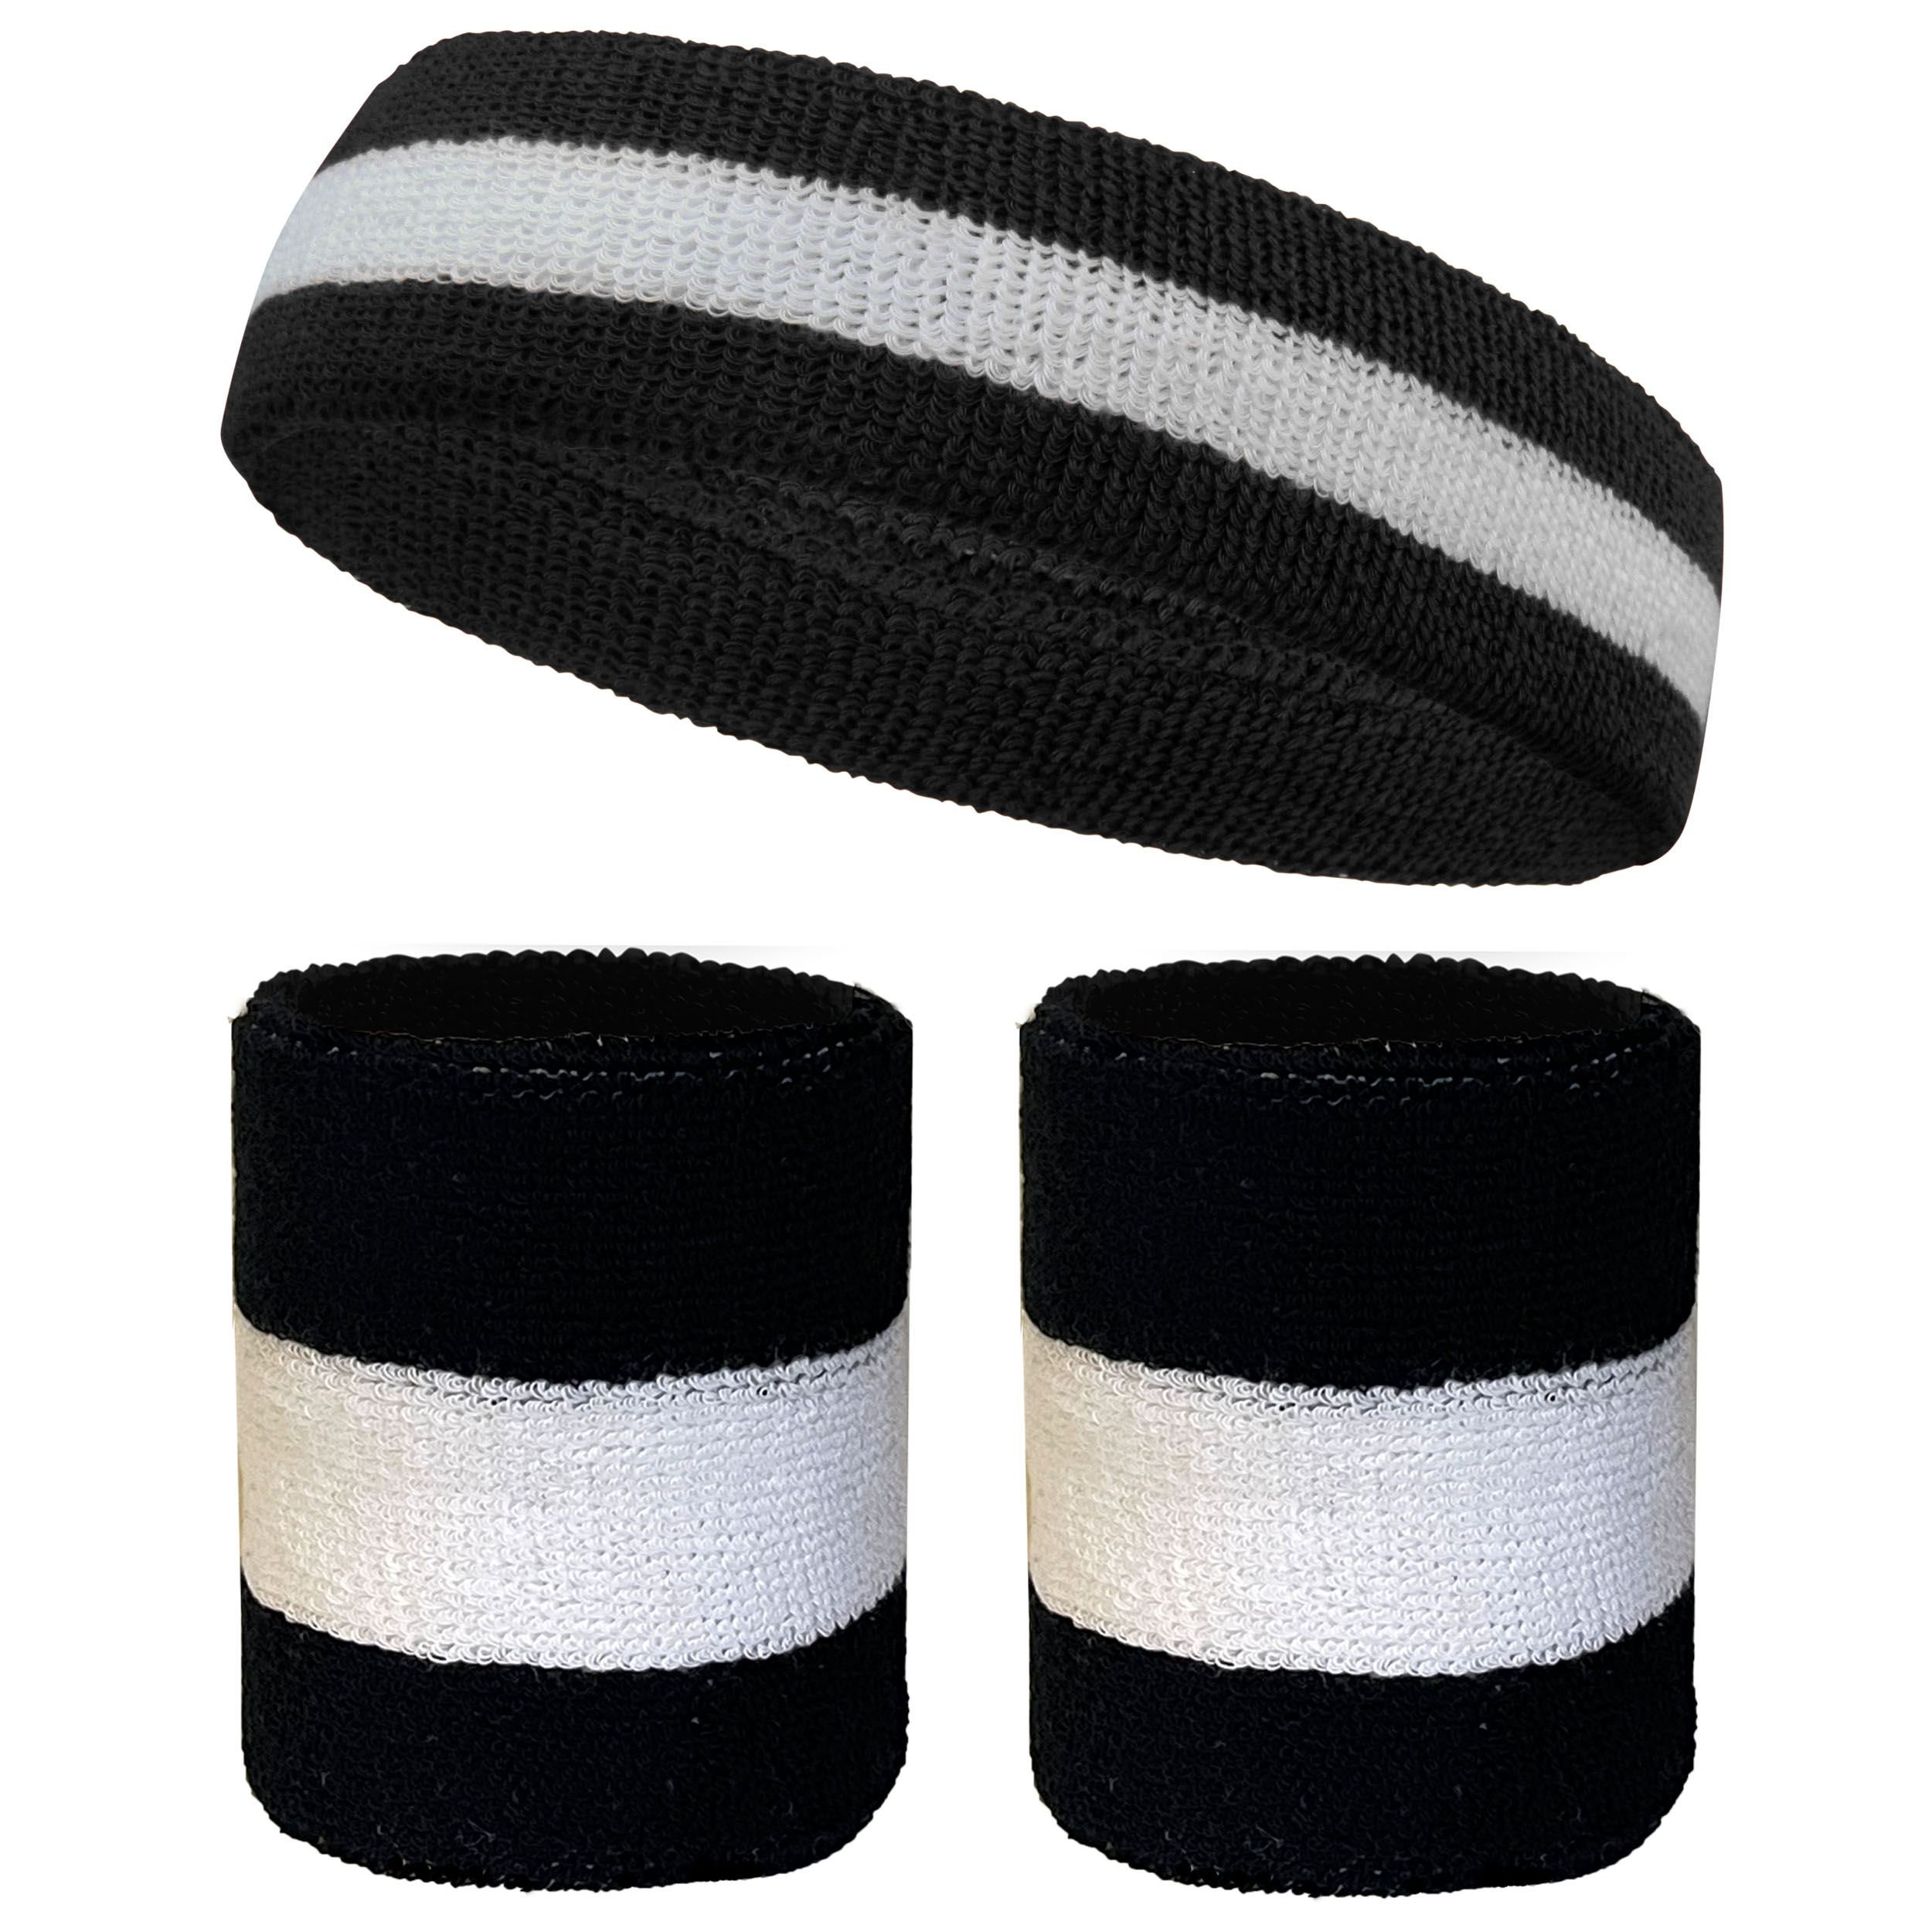 White with Black Striped Quality Headband & Wristbands Set - Click Image to Close